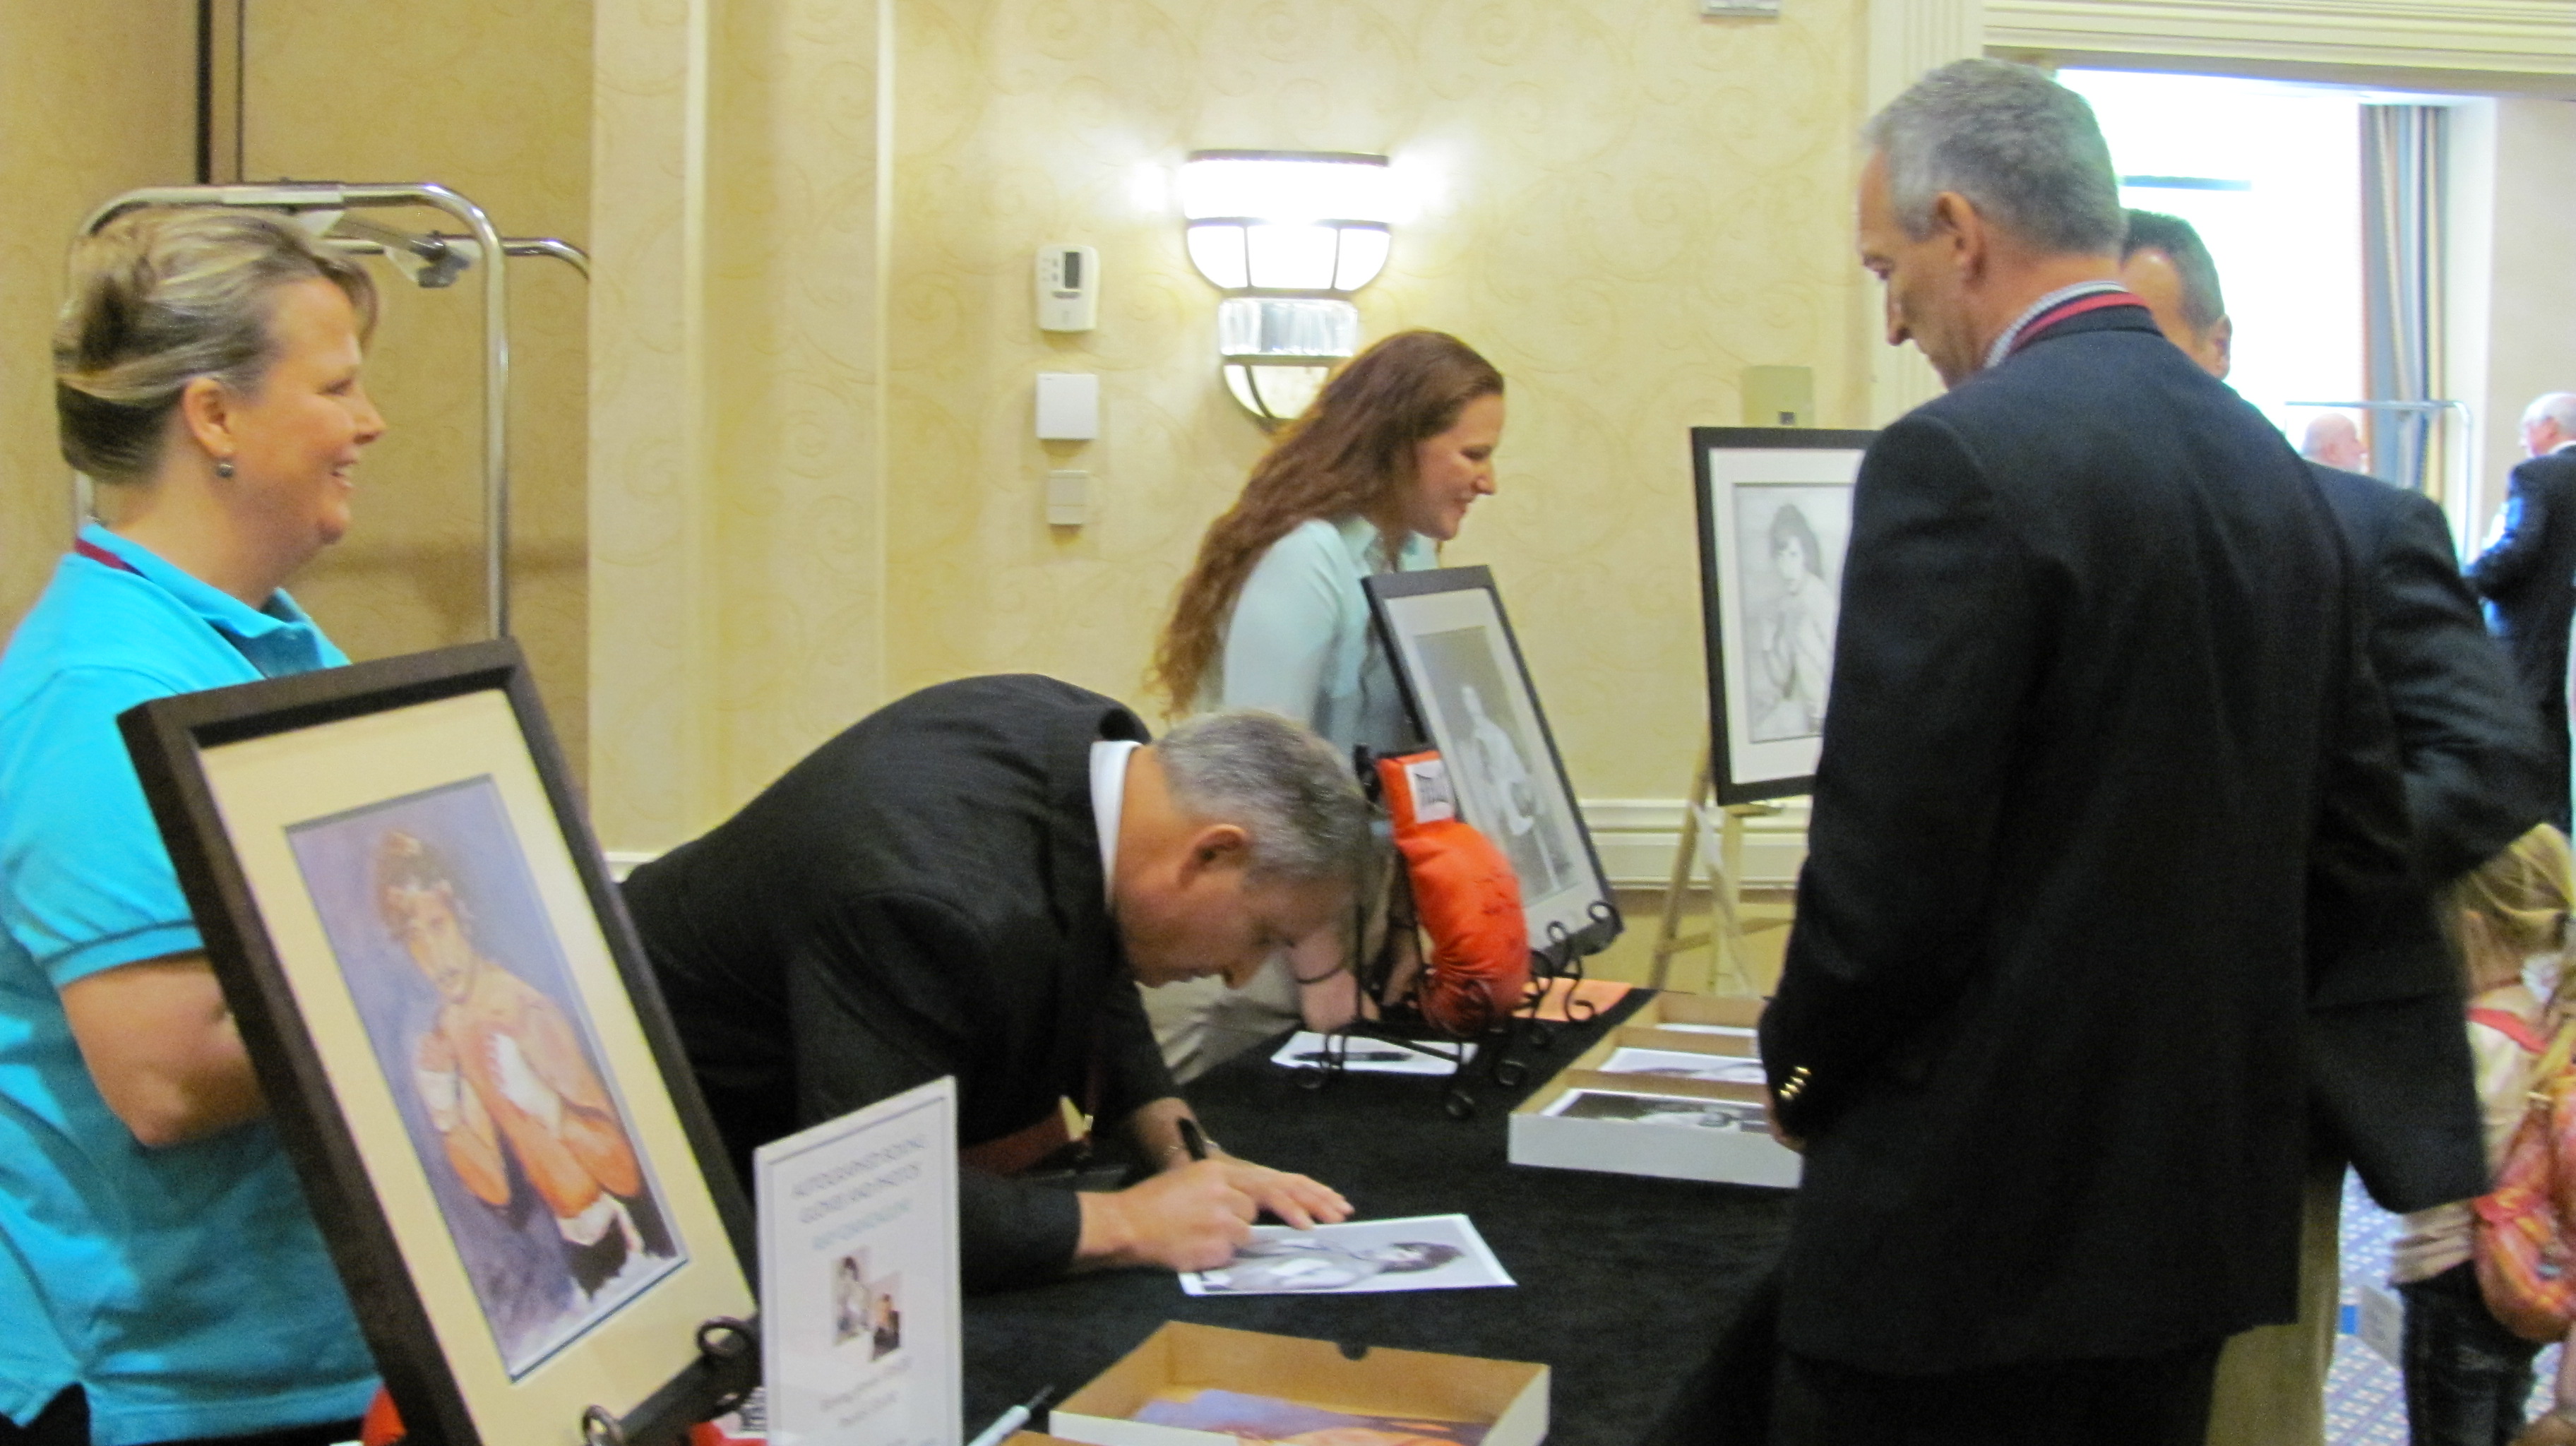 Ciancaglini signs autographs following his keynote address to help raise funds for BIANYS programming.